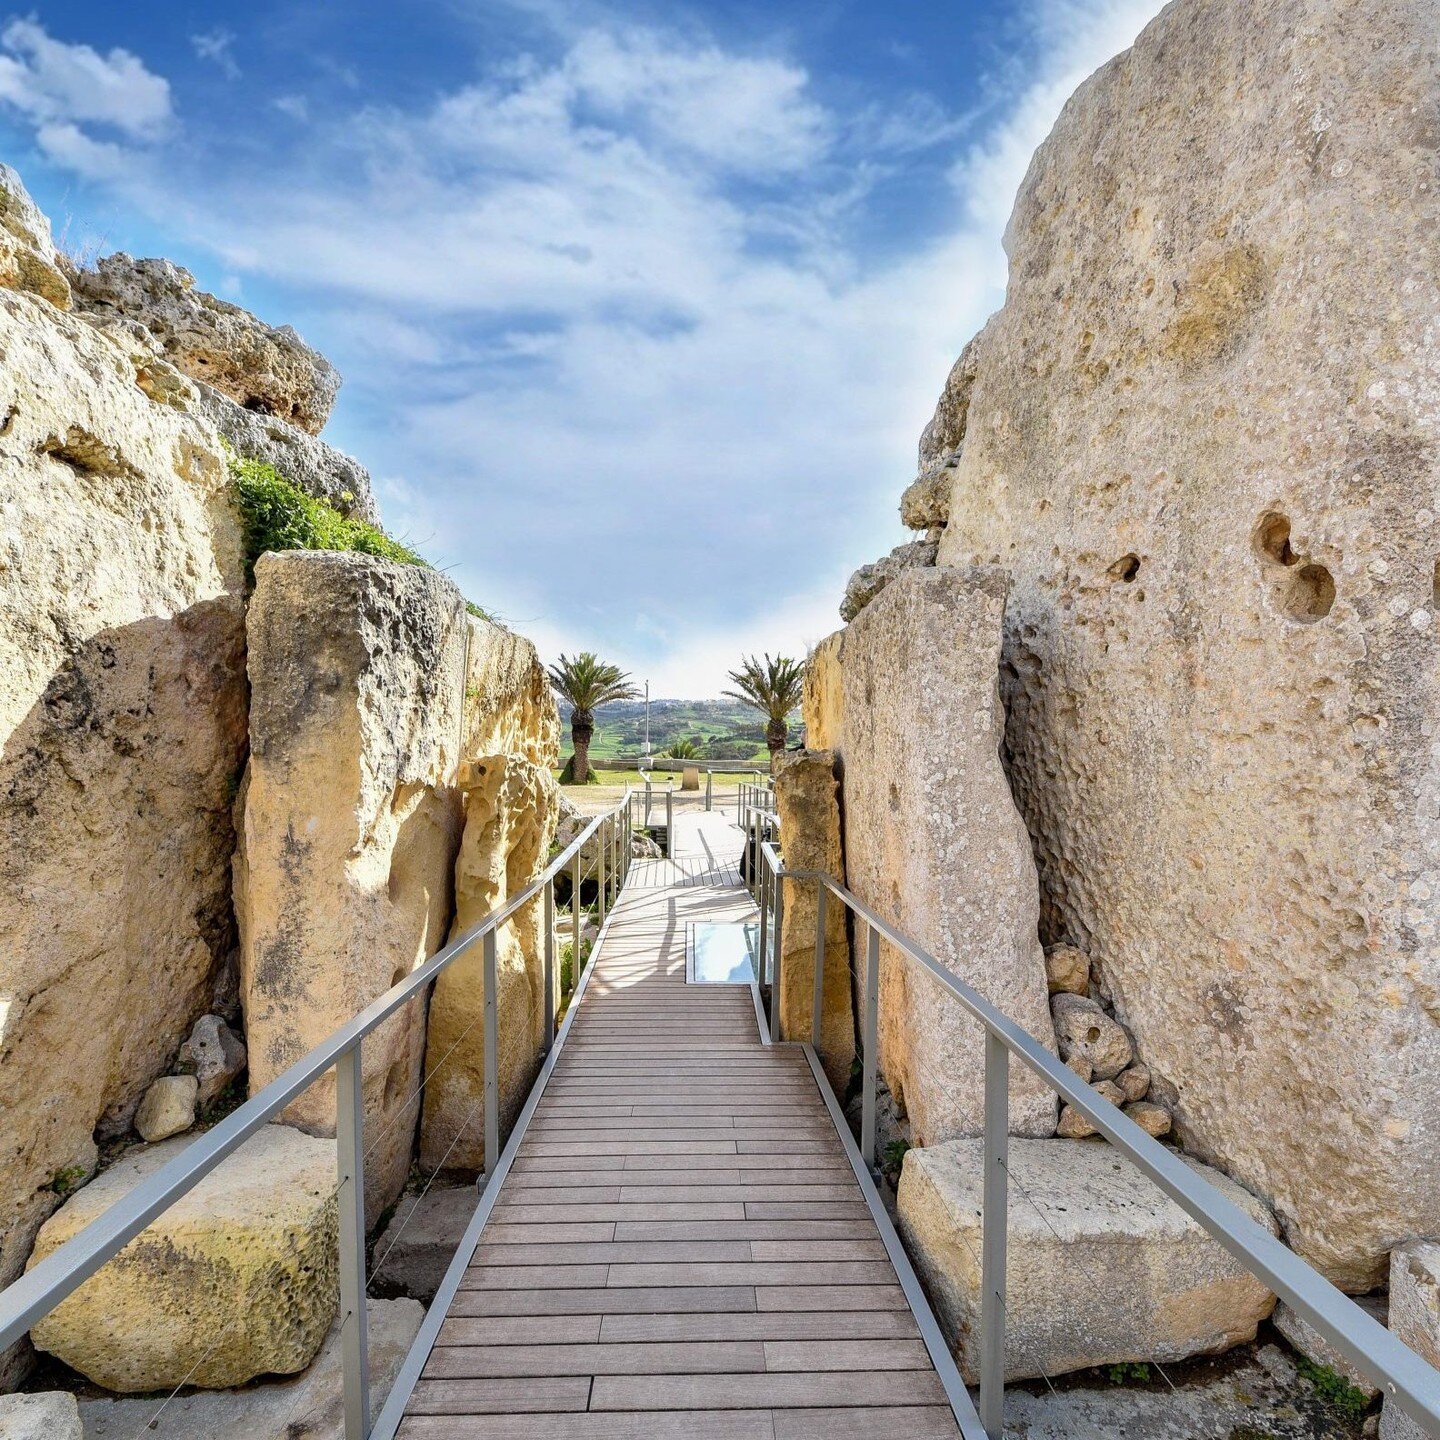 DO YOU KNOW

The Ggantija Temples are the oldest buildings in the world.

In fact, the Megalithic Temples of Malta date back to 3600-2500 B.C., with the Ggantija Temples in Gozo being classified as the oldest structure in the world, dating back to ar